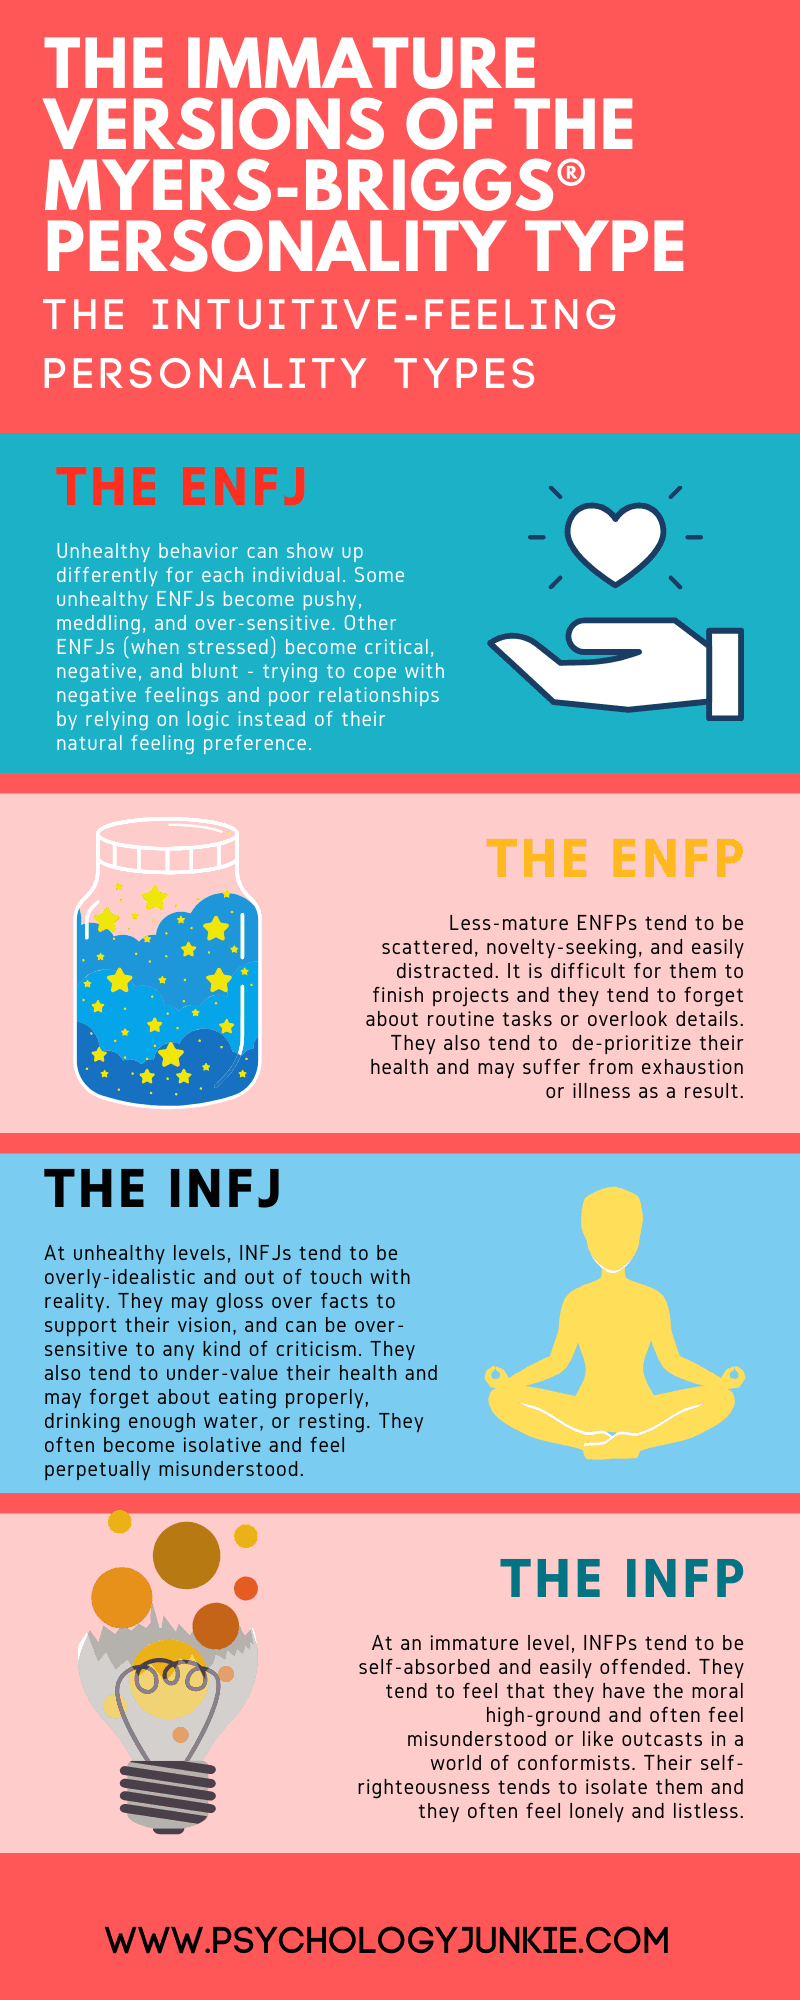 ENFP to INFP <3 : r/ENFP